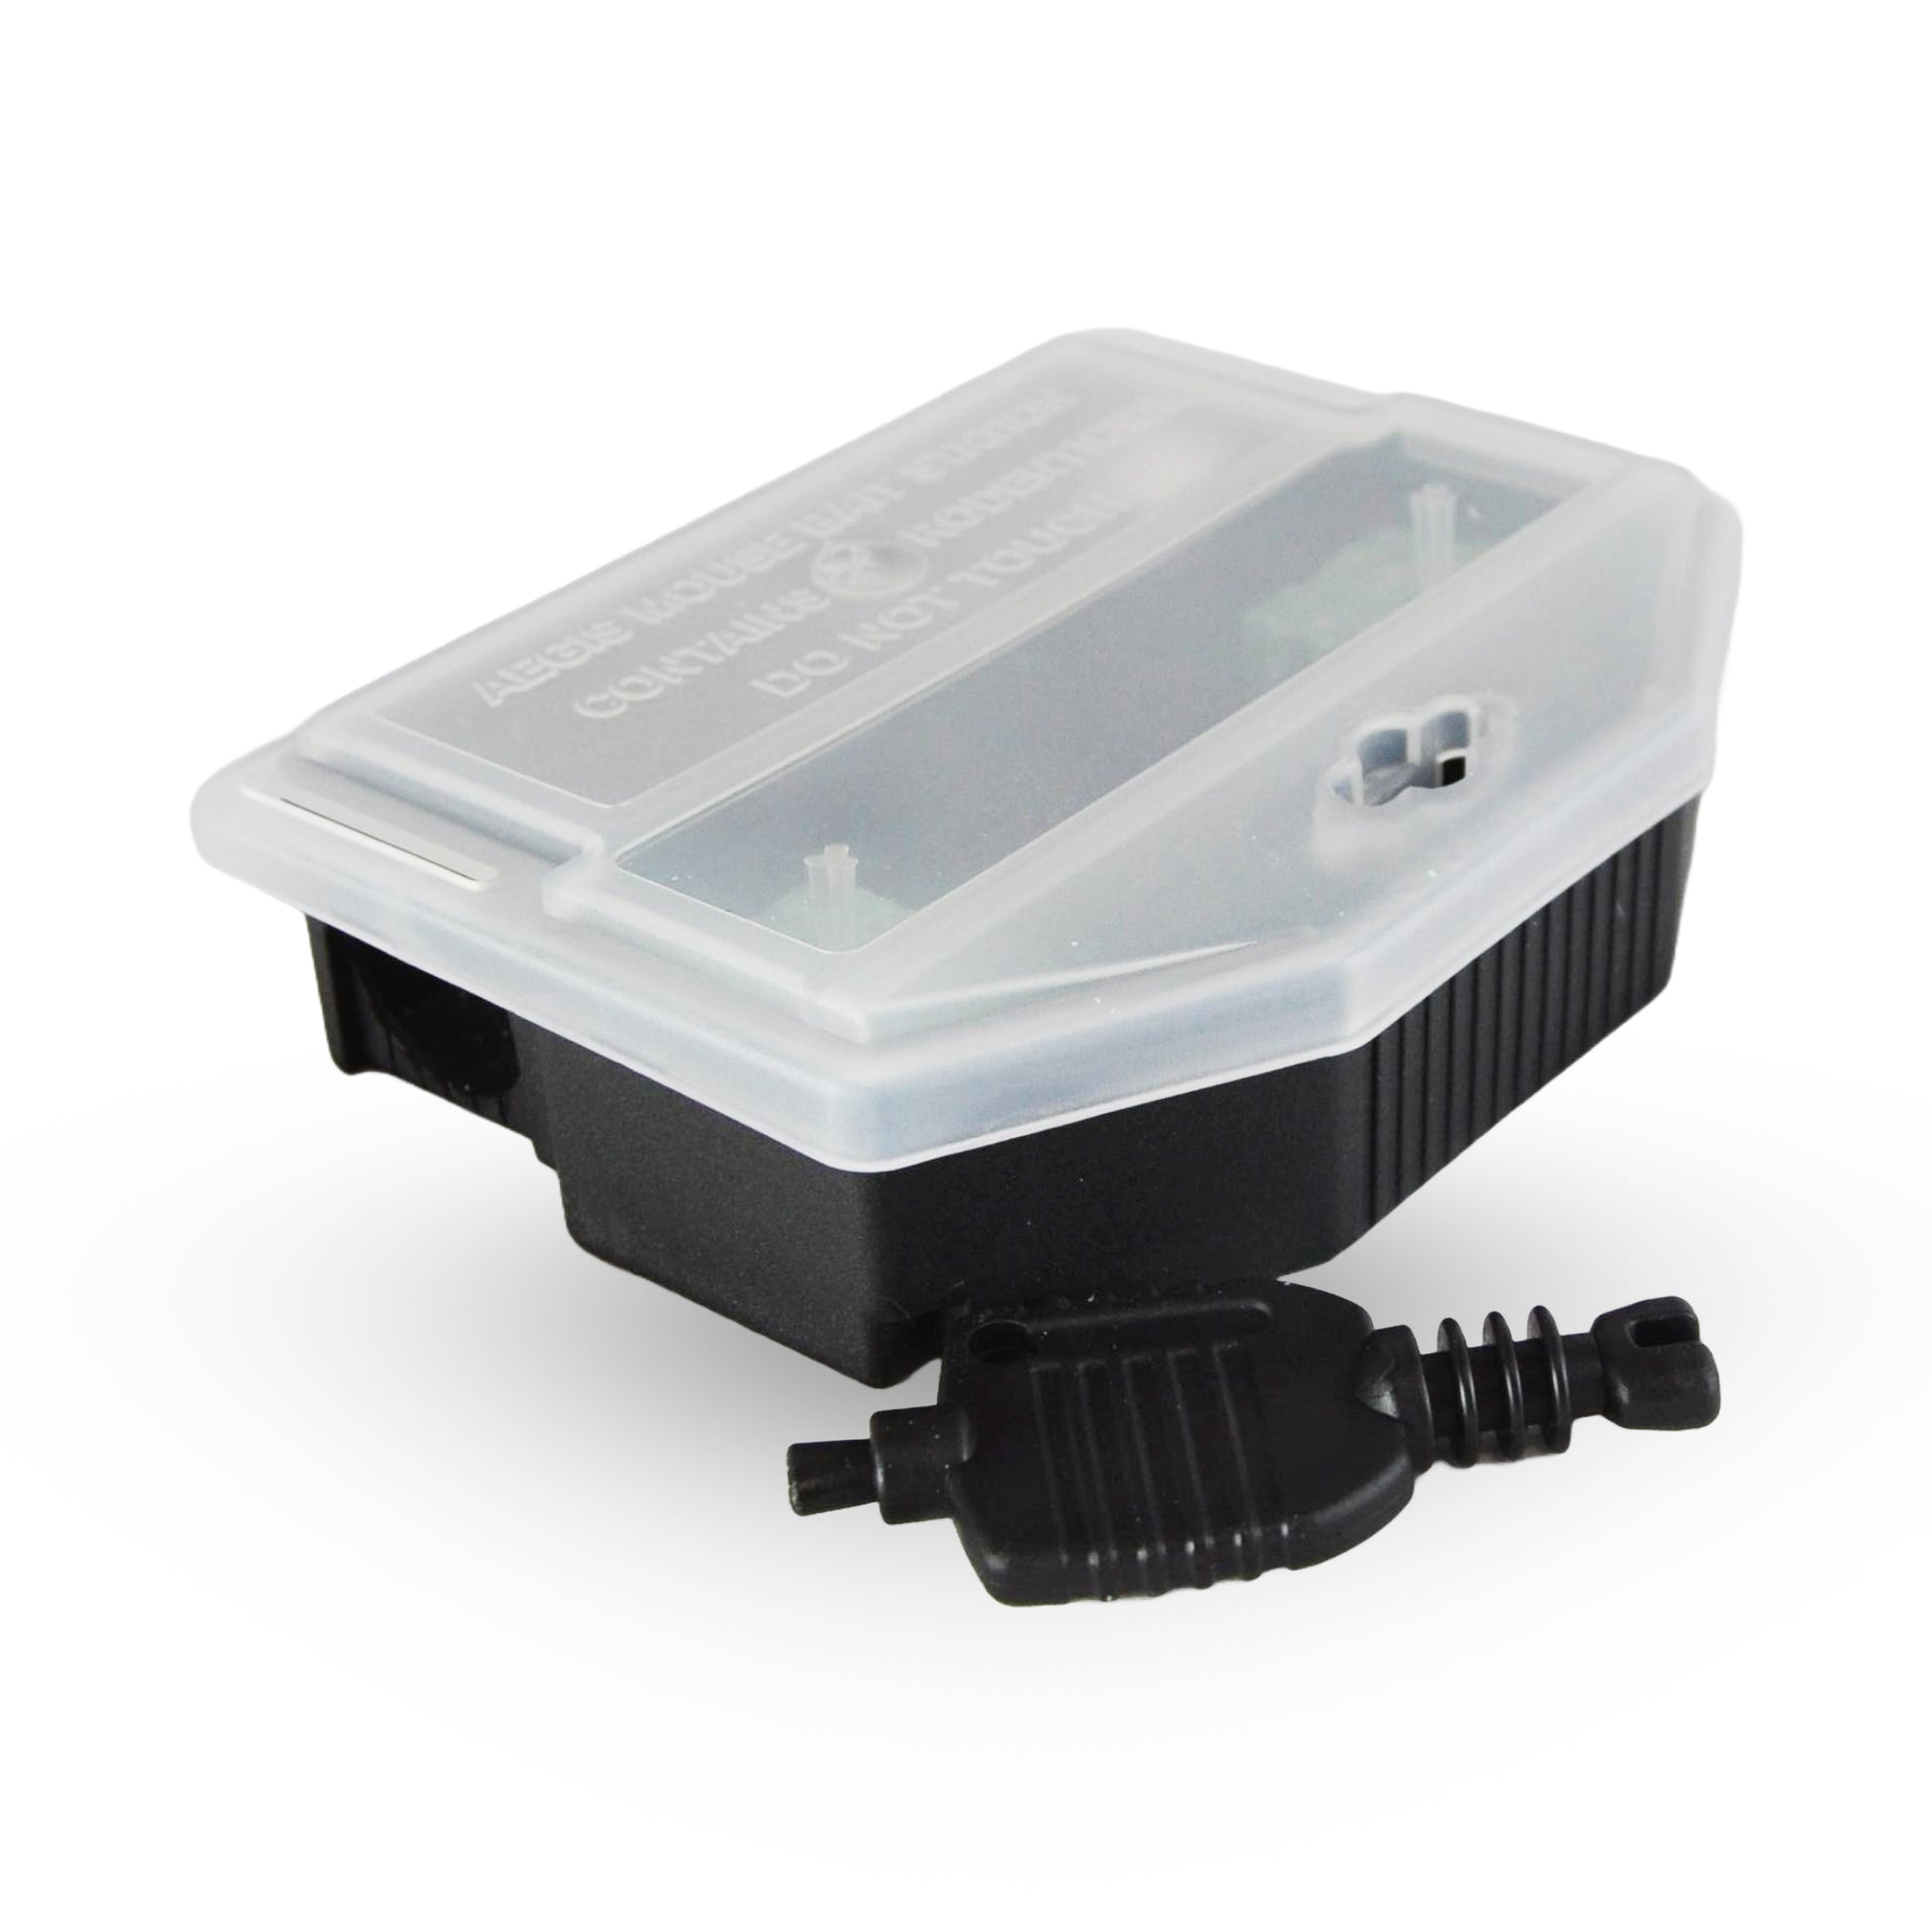 MHOUSE, Rechargeable Bait Station for Mice and Other Small Rodents (12 baits)